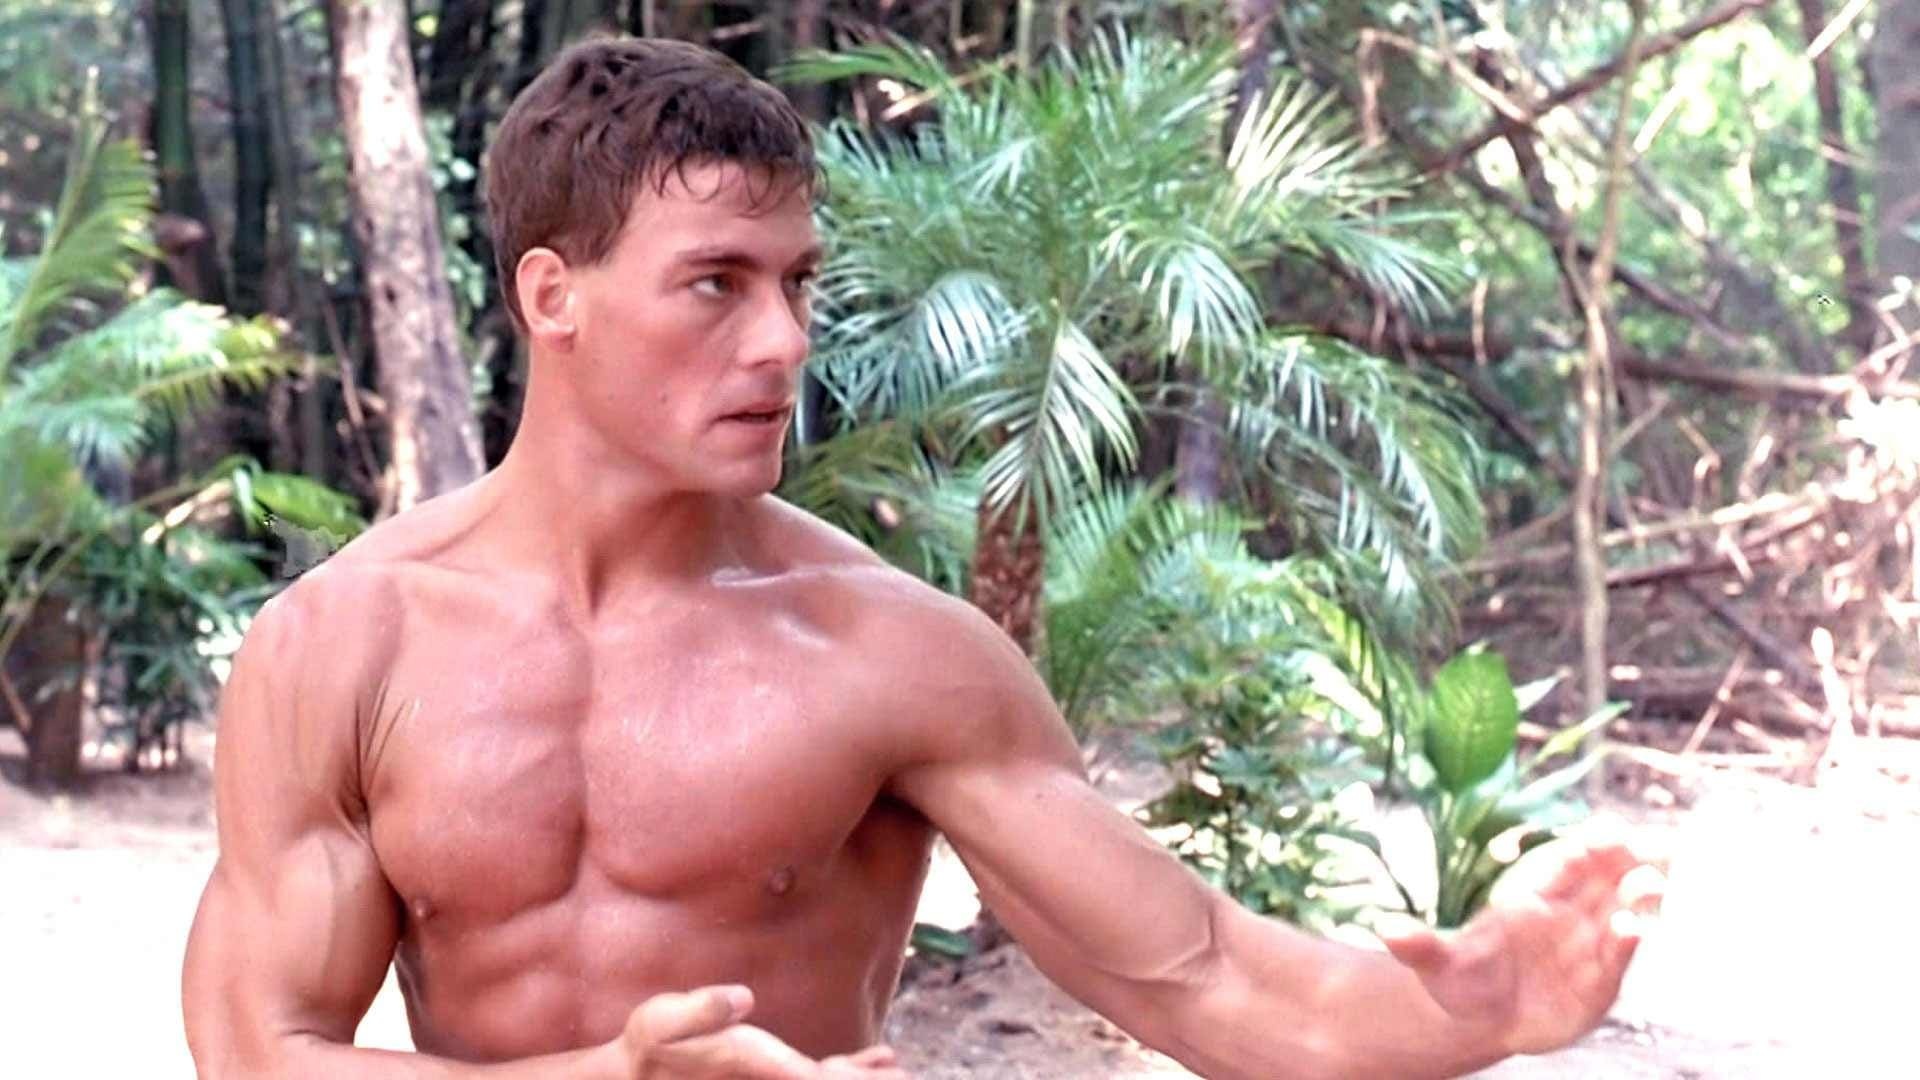 Kickboxer (Movie): The score for the film was composed by Paul Hertzog, Jean-Claude Van Damme. 1920x1080 Full HD Wallpaper.